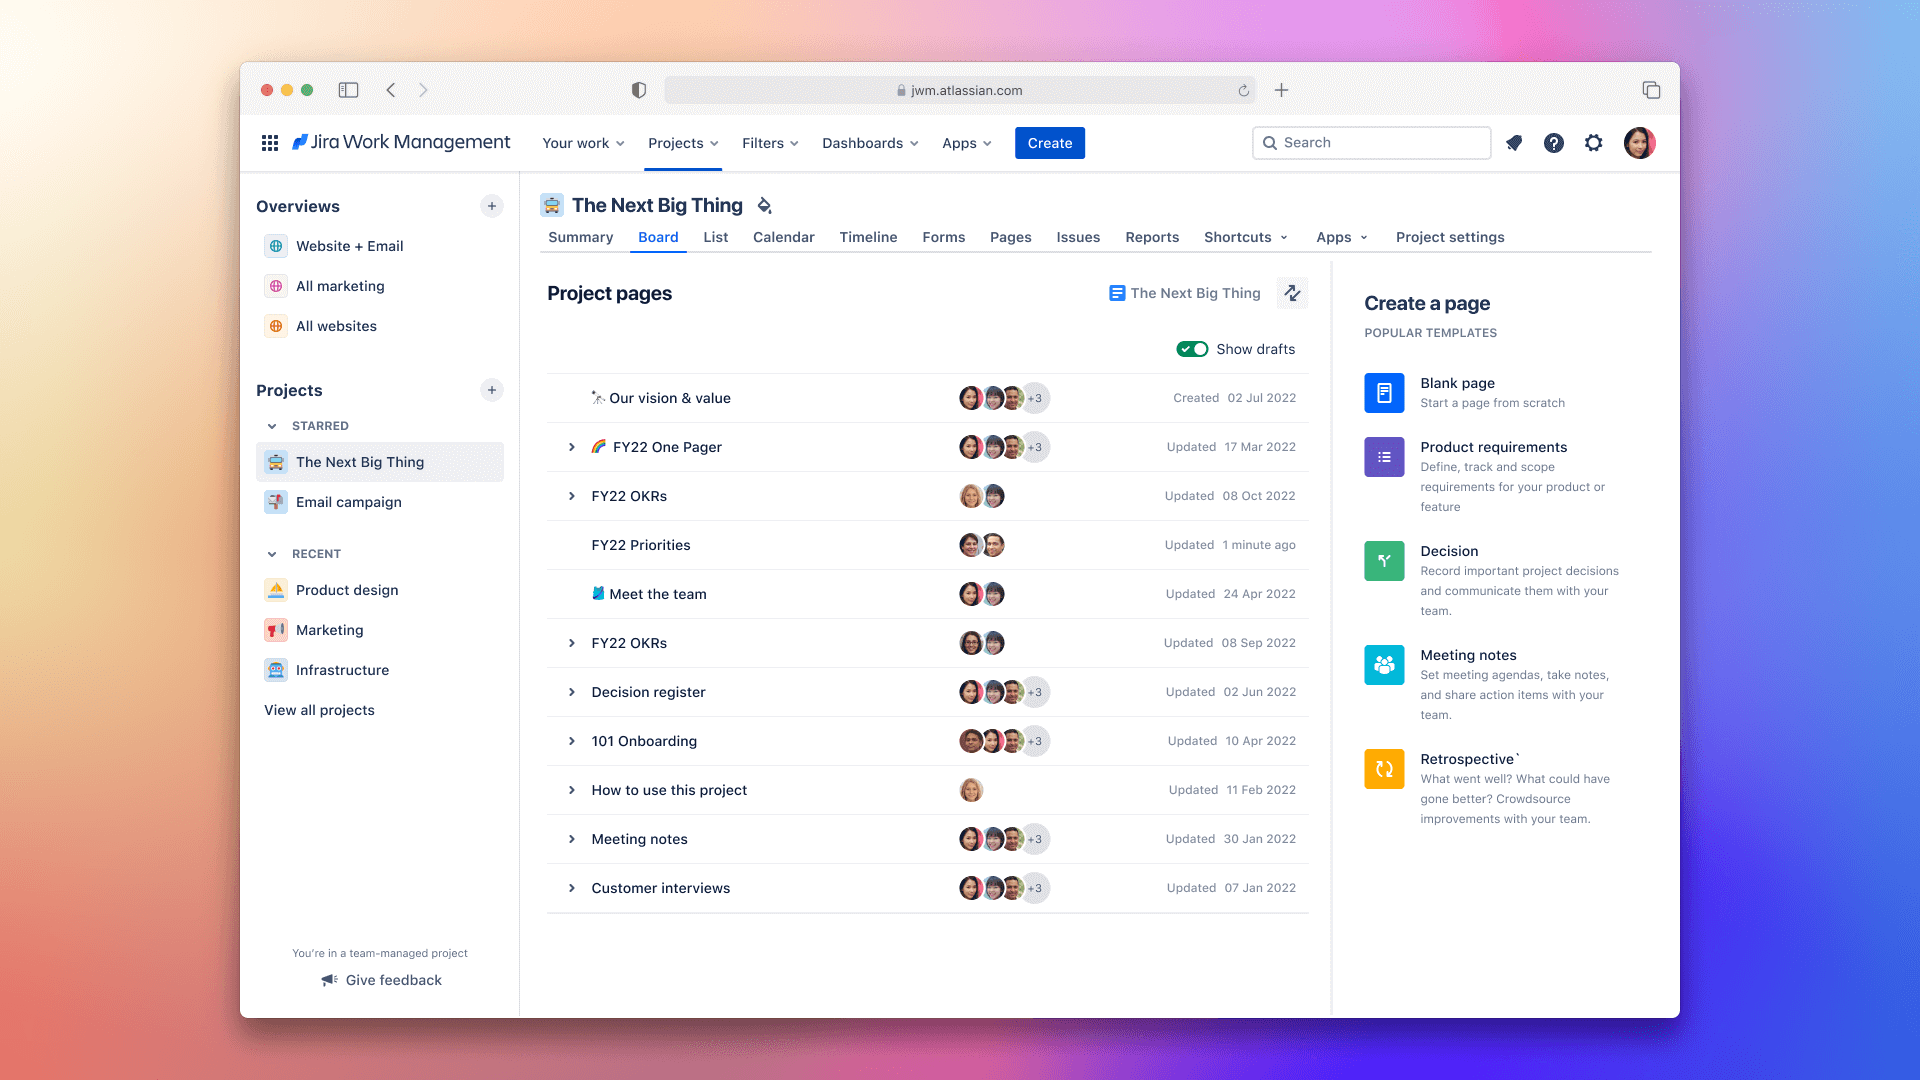 Collaboration mode in the Jira Work Management list view